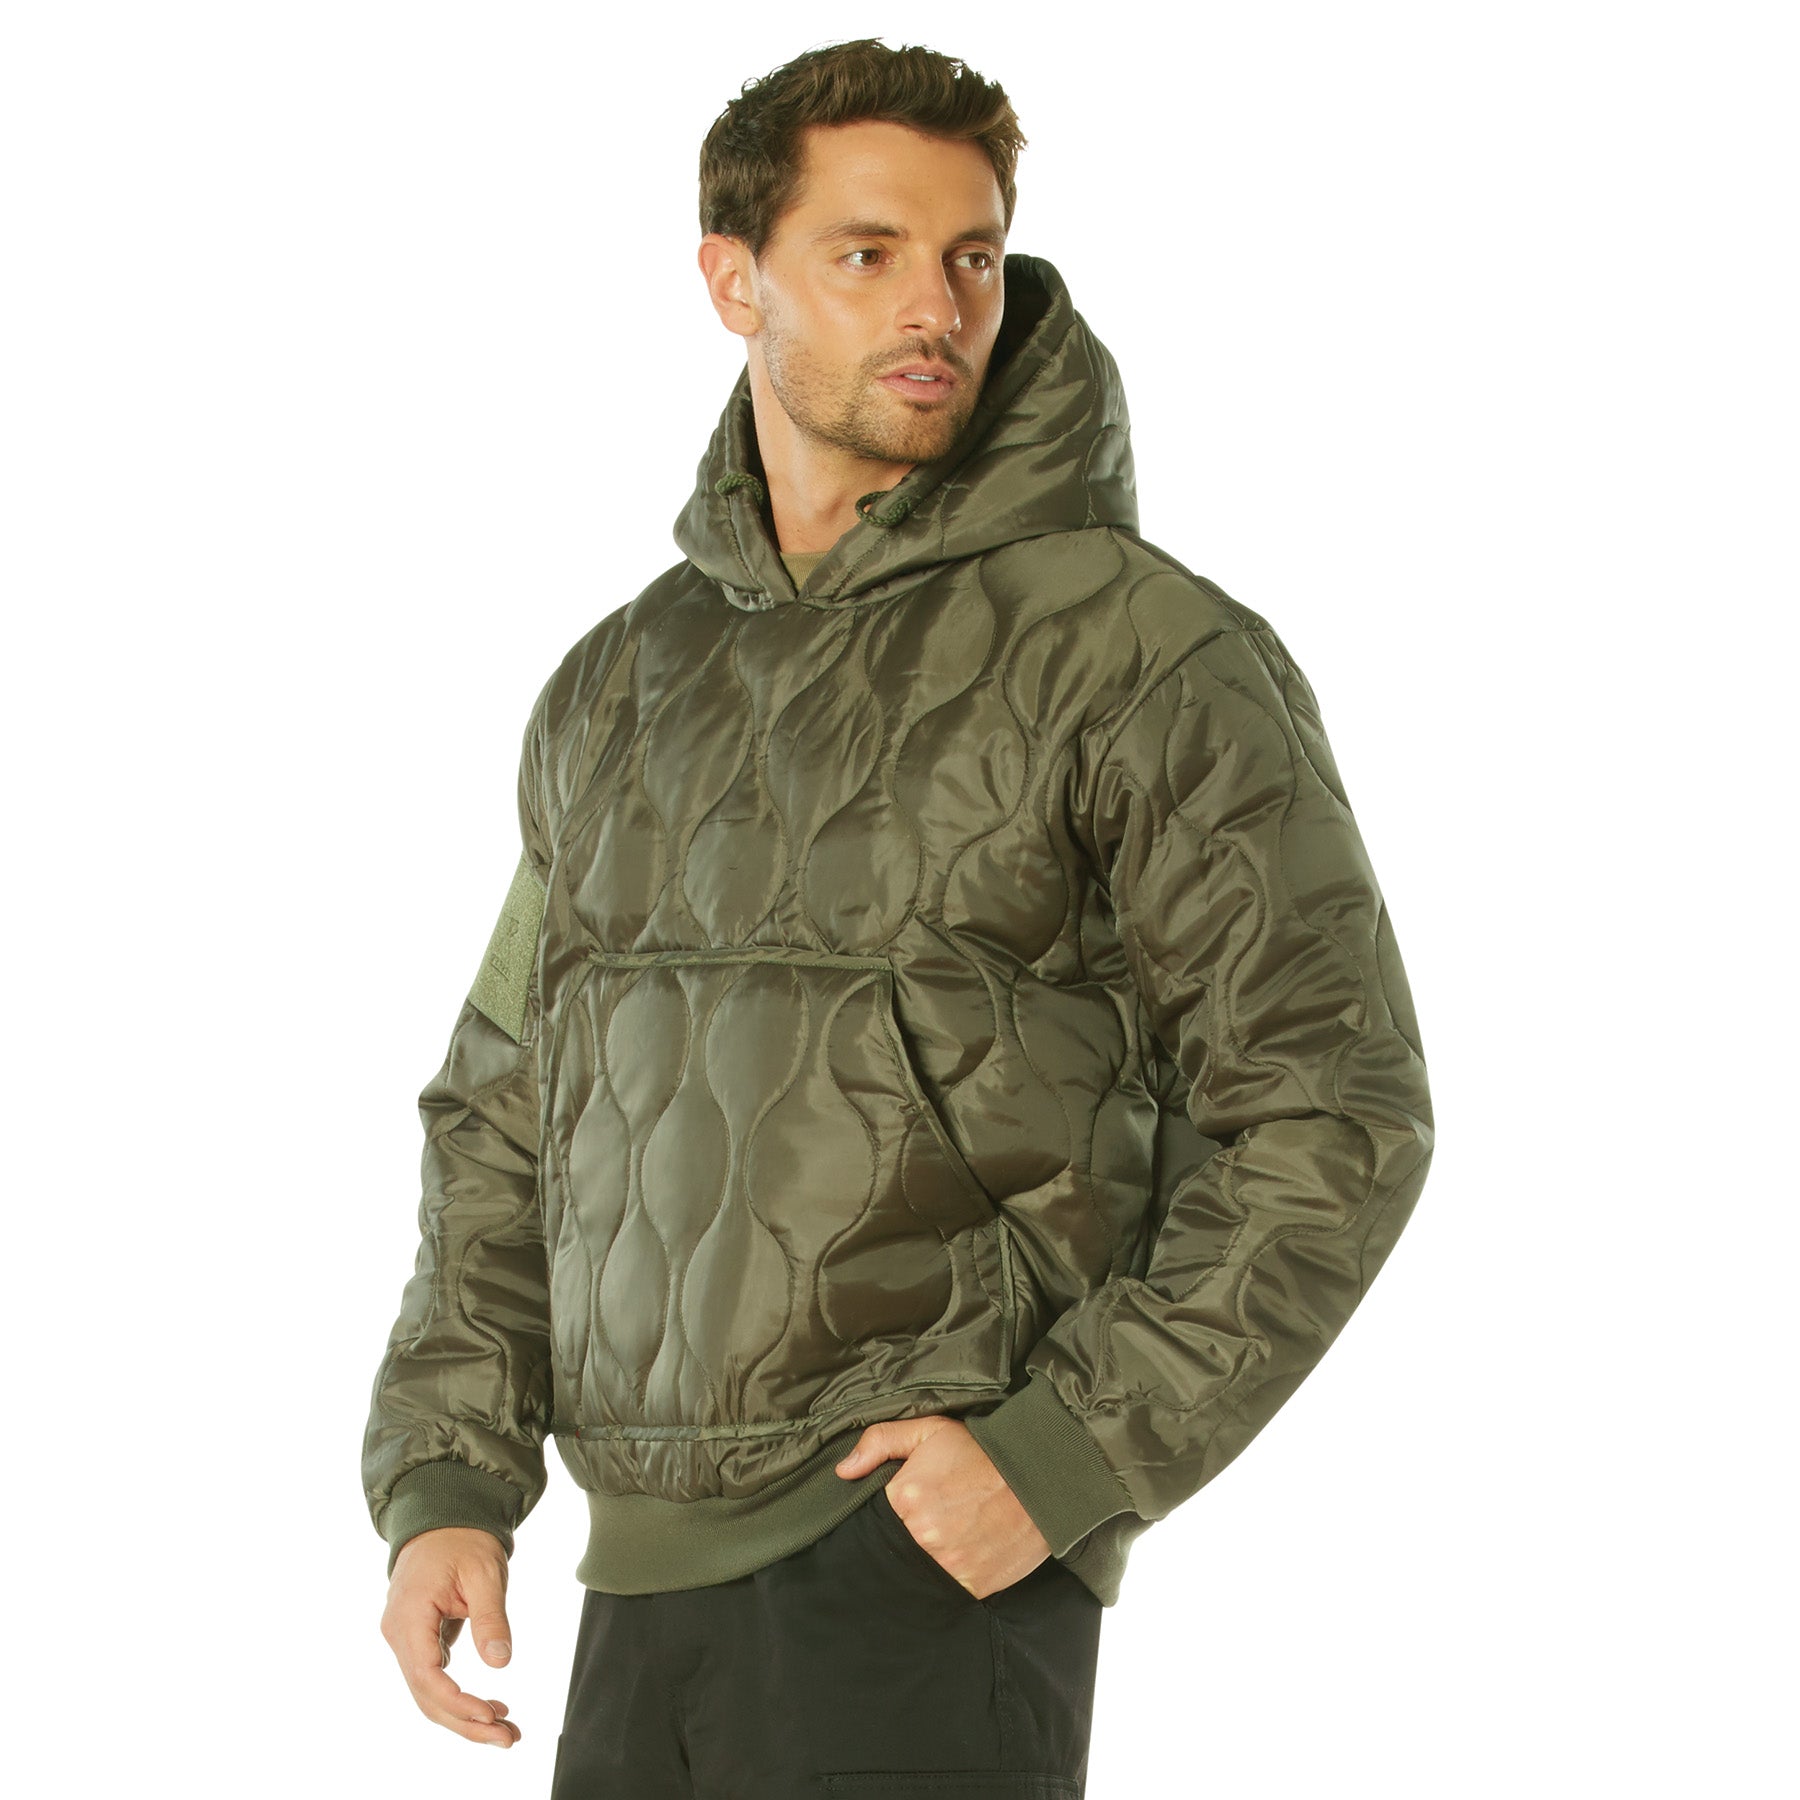 Poly Quilted Woobie Hooded Sweatshirts Olive Drab